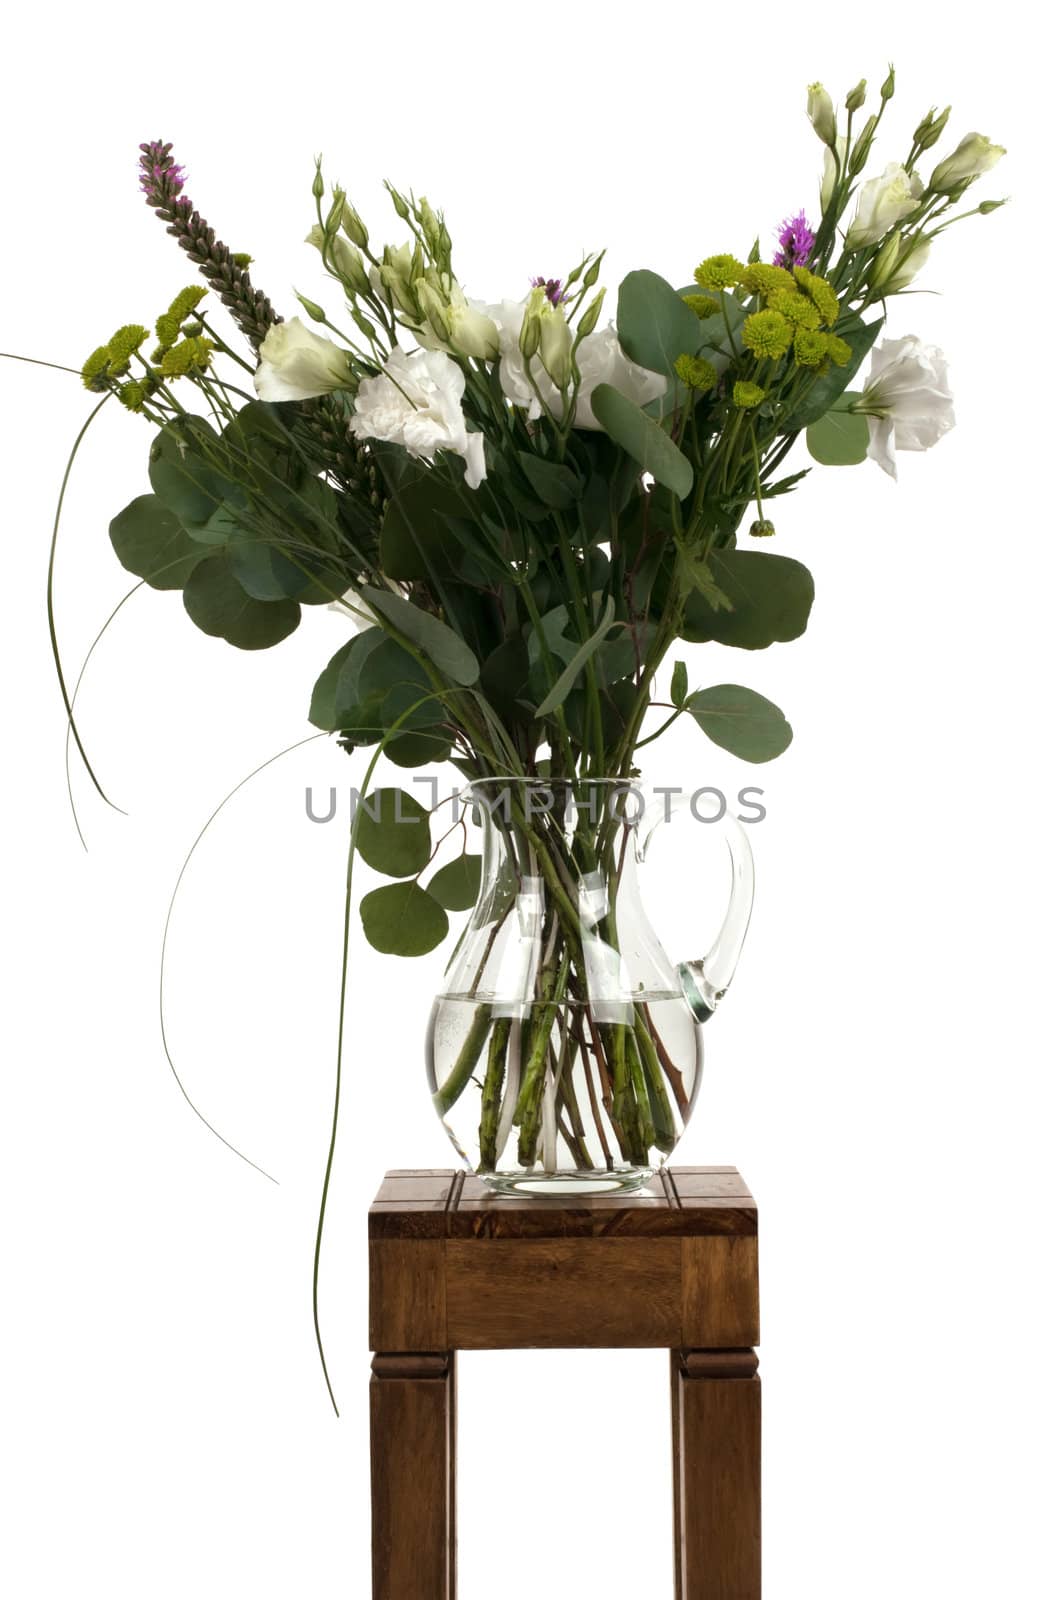 A bouquet of flowers on a small table